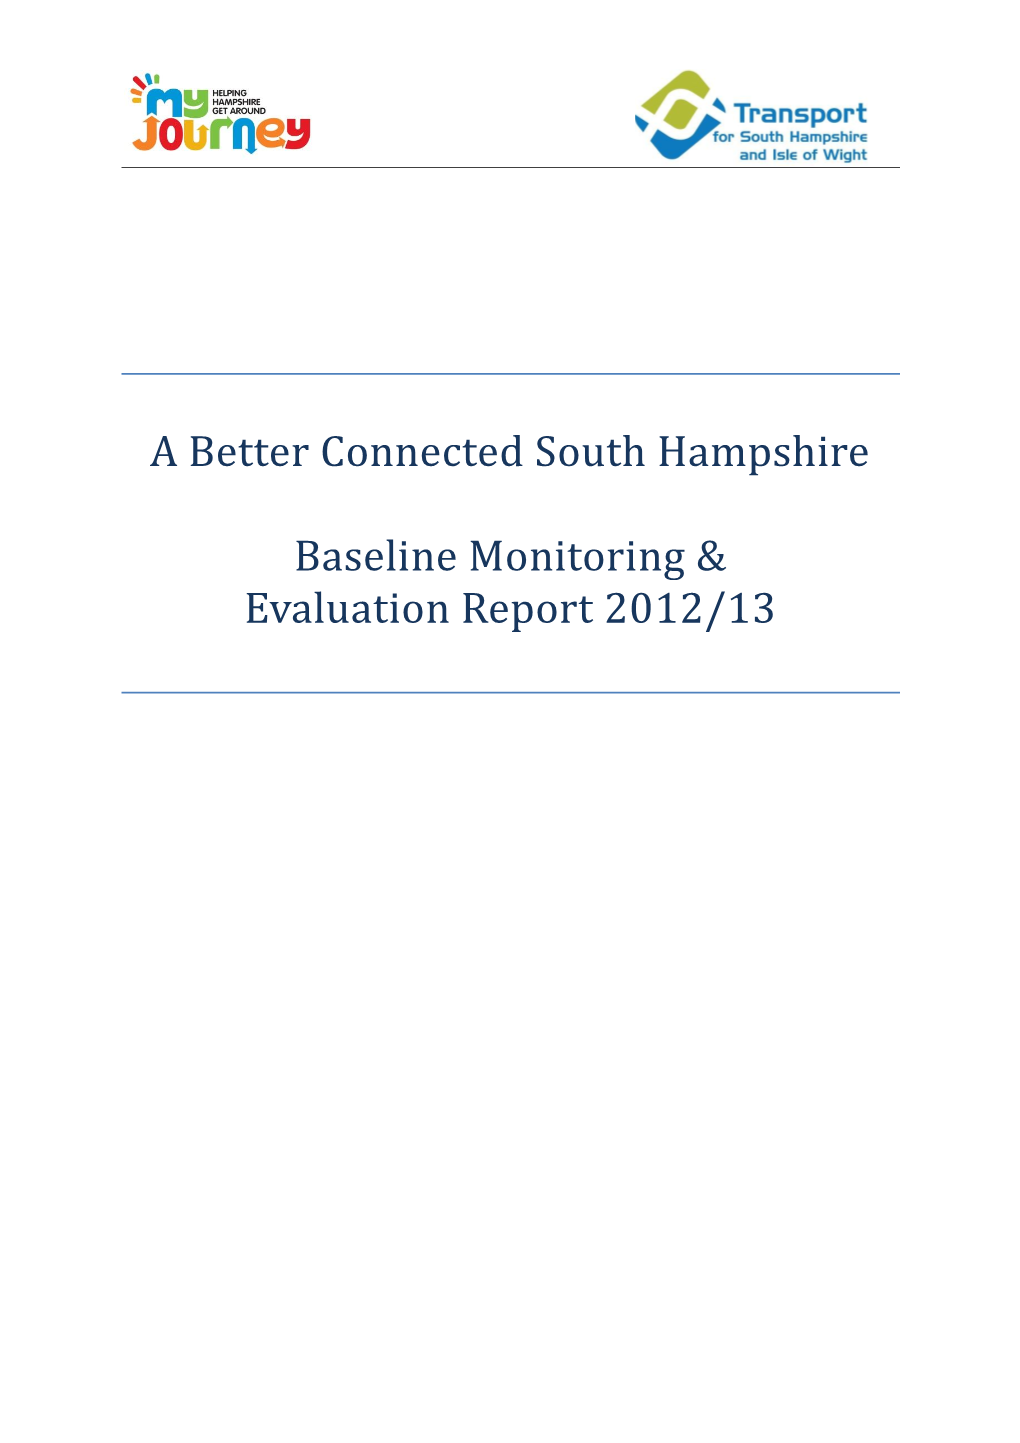 A Better Connected South Hampshire Baseline Monitoring & Evaluation Report 2012/13